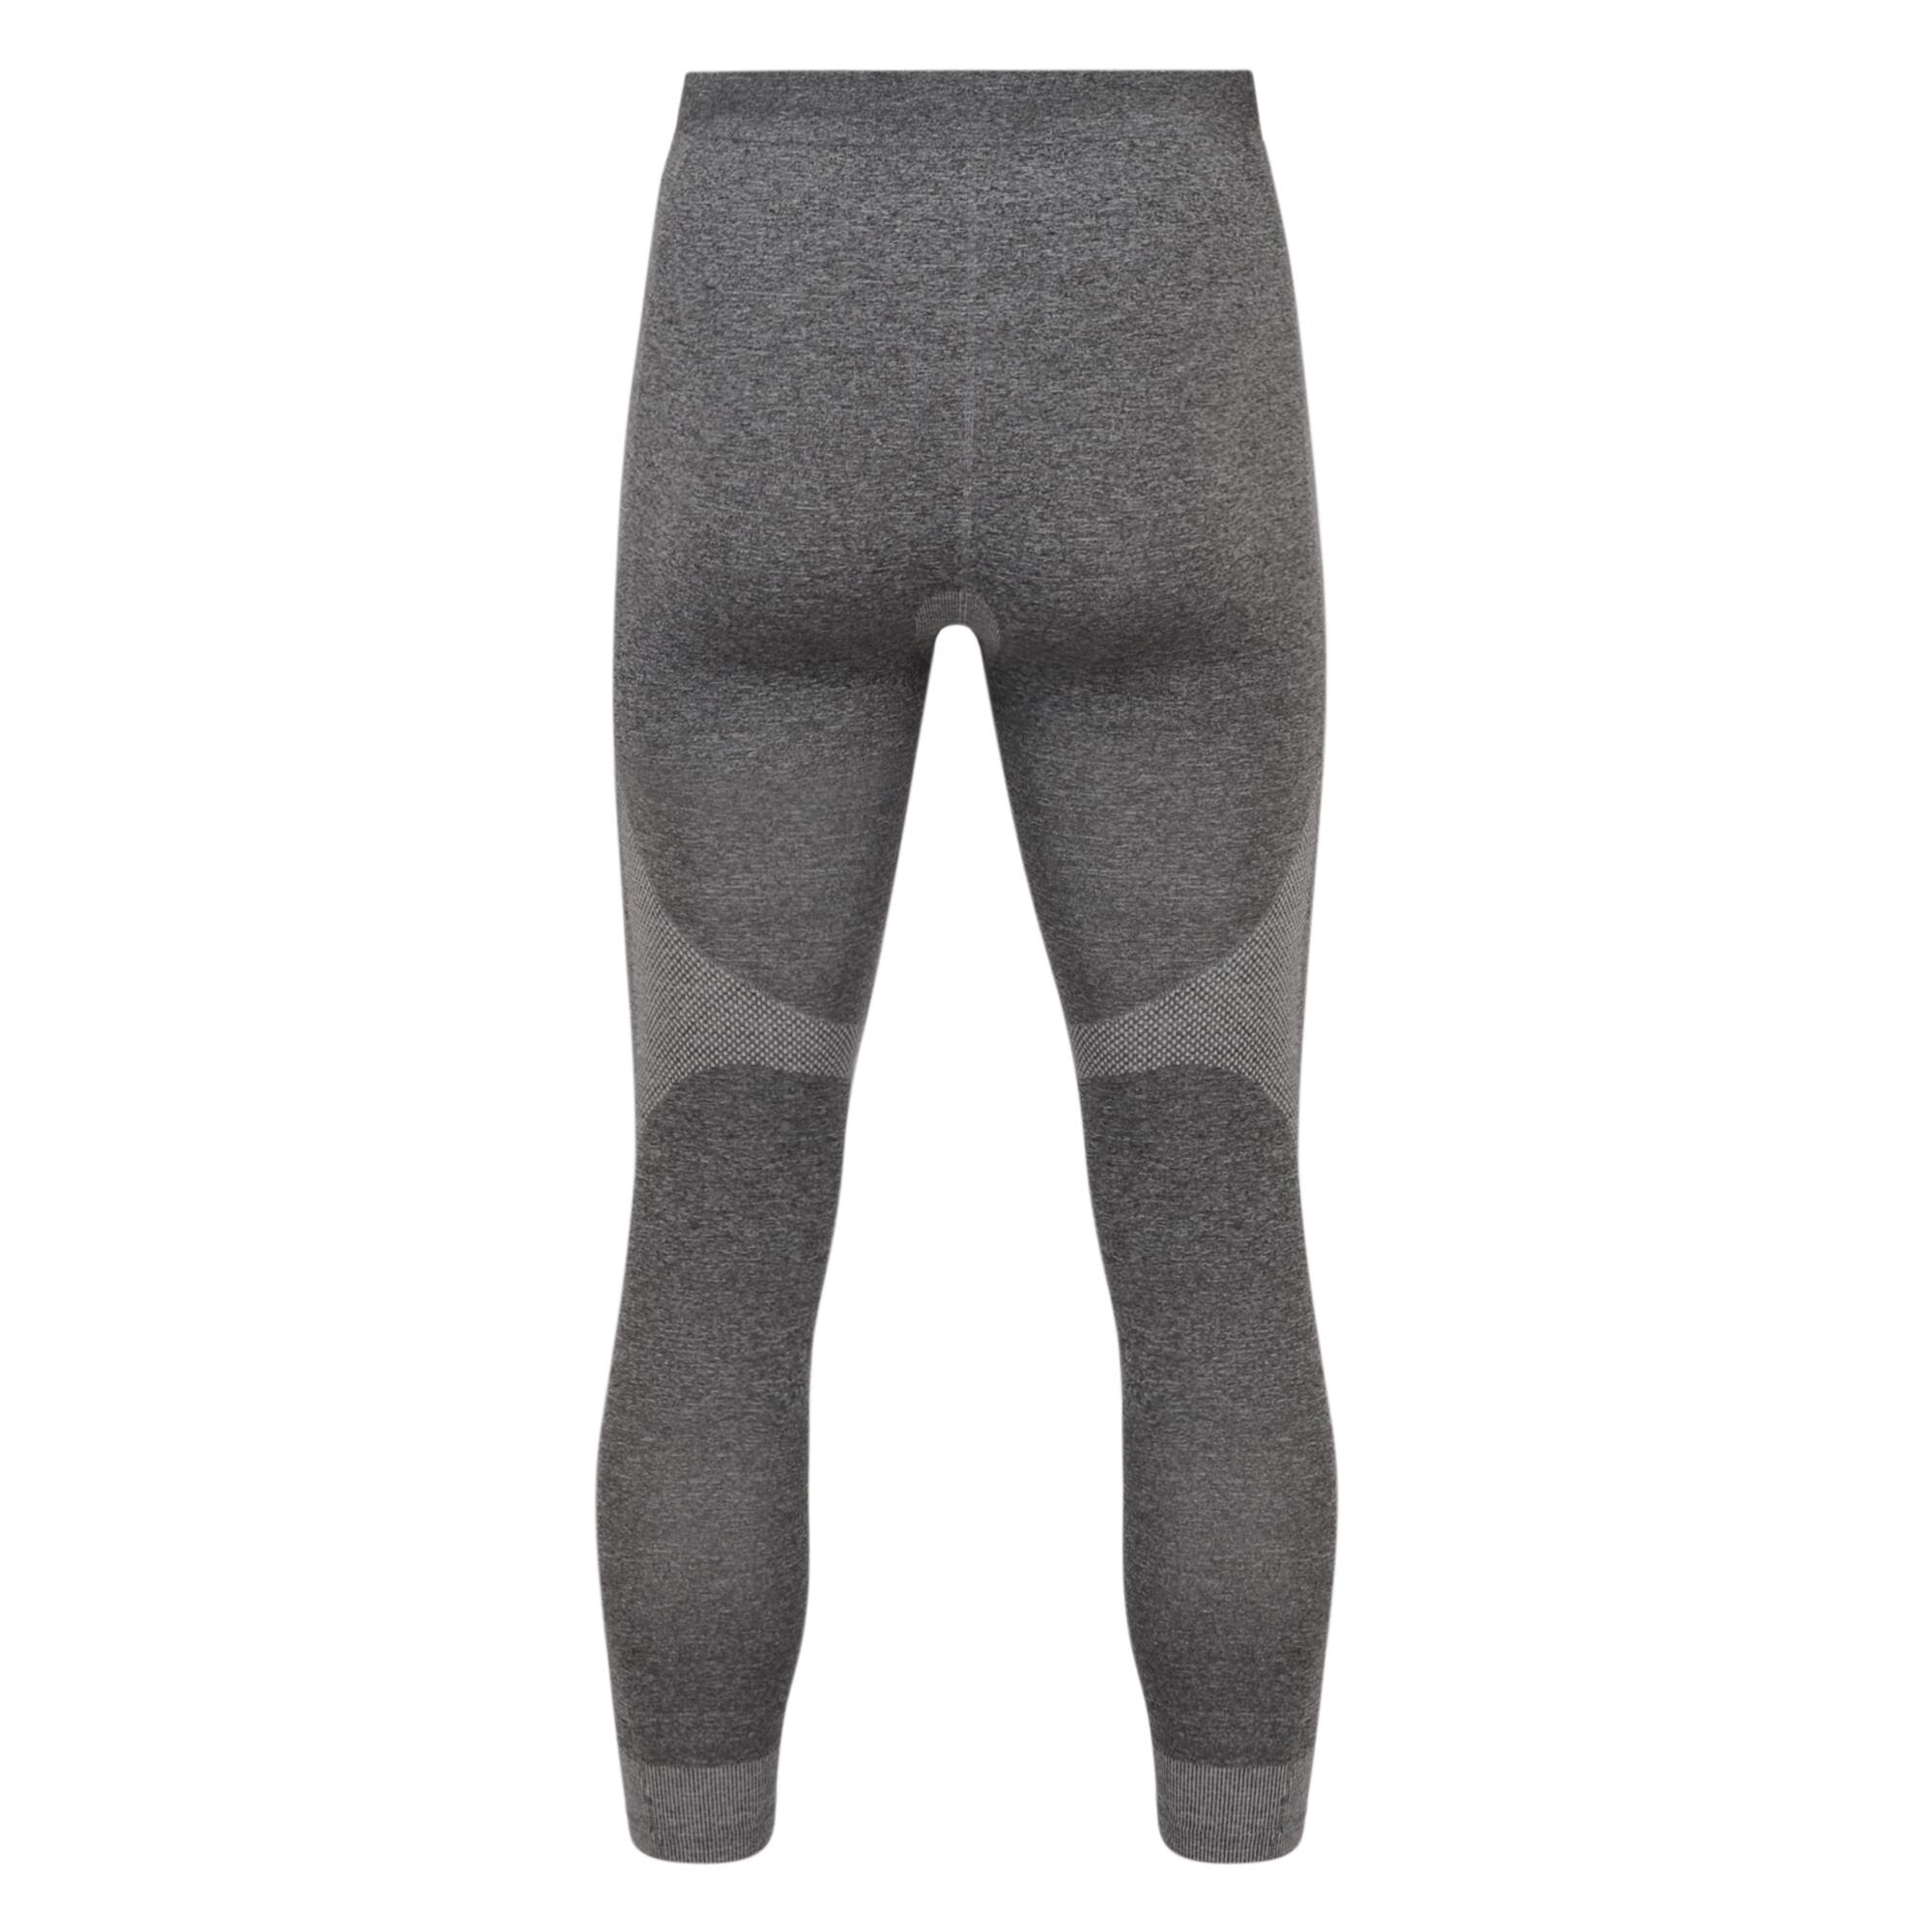 Mens In The Zone II Base Layer Bottoms (Charcoal Grey Marl) 2/5